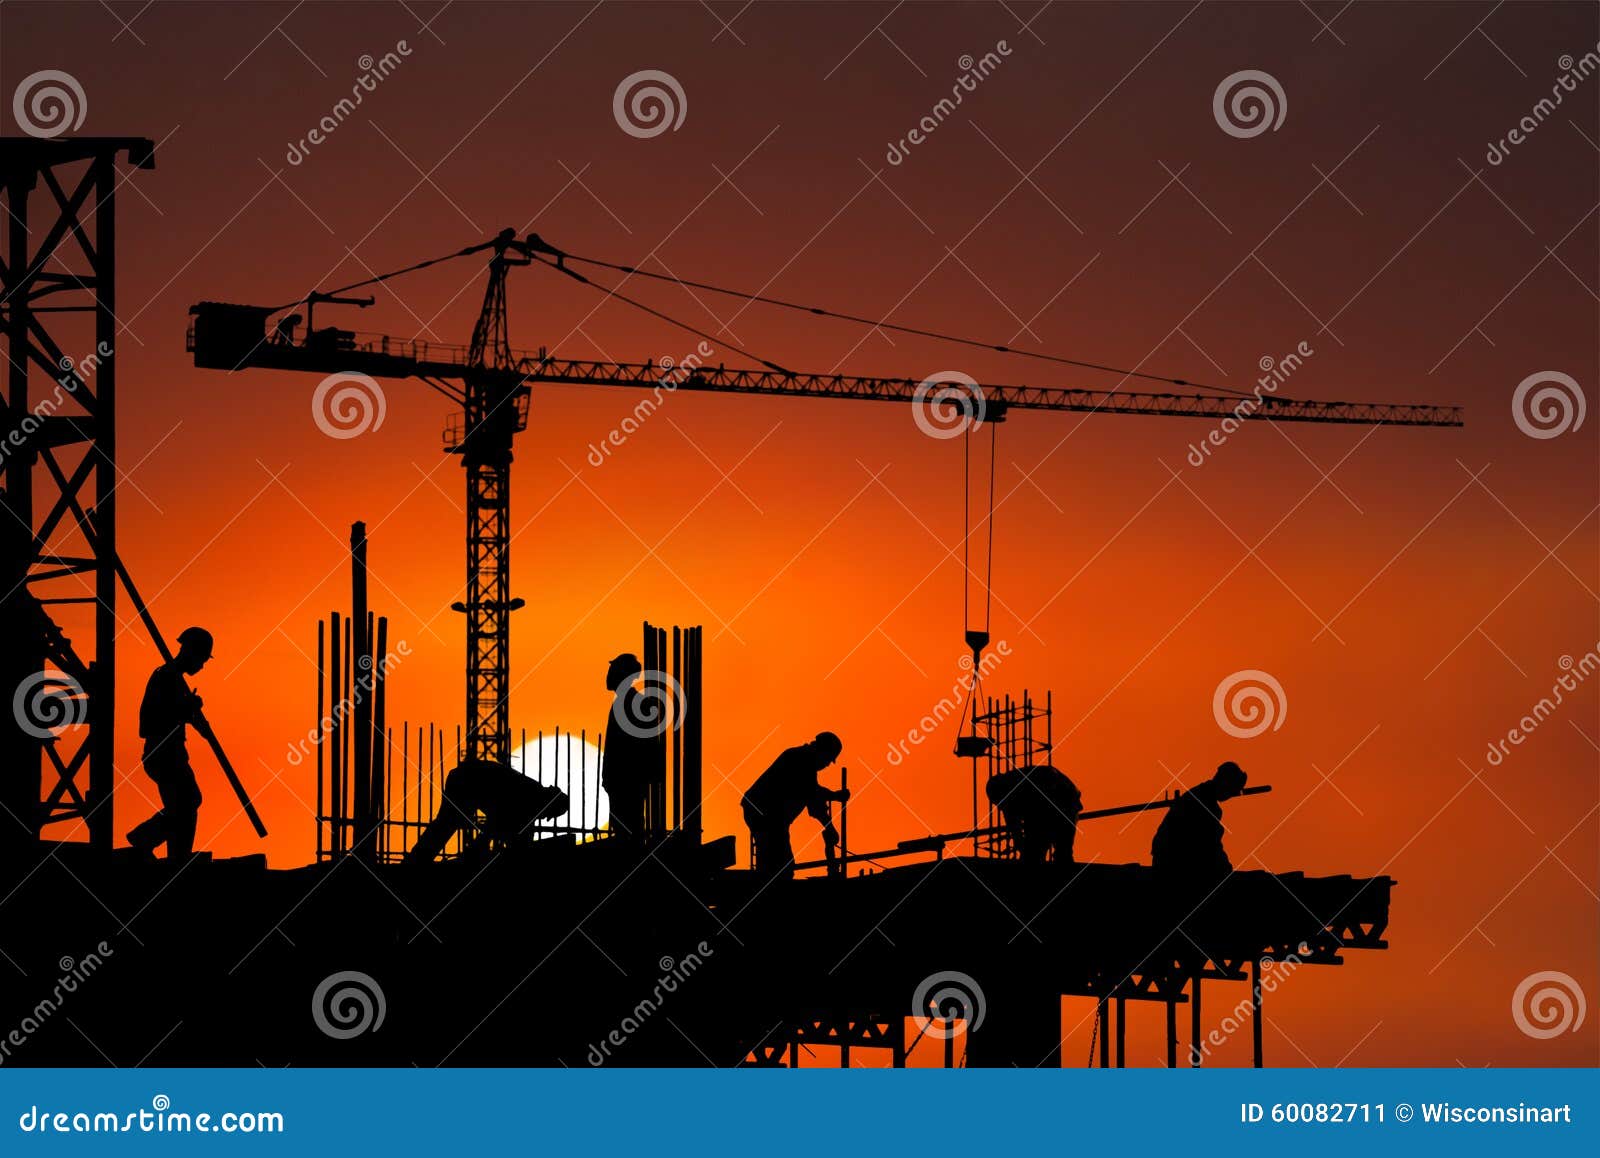 construction site, worker, workers, background